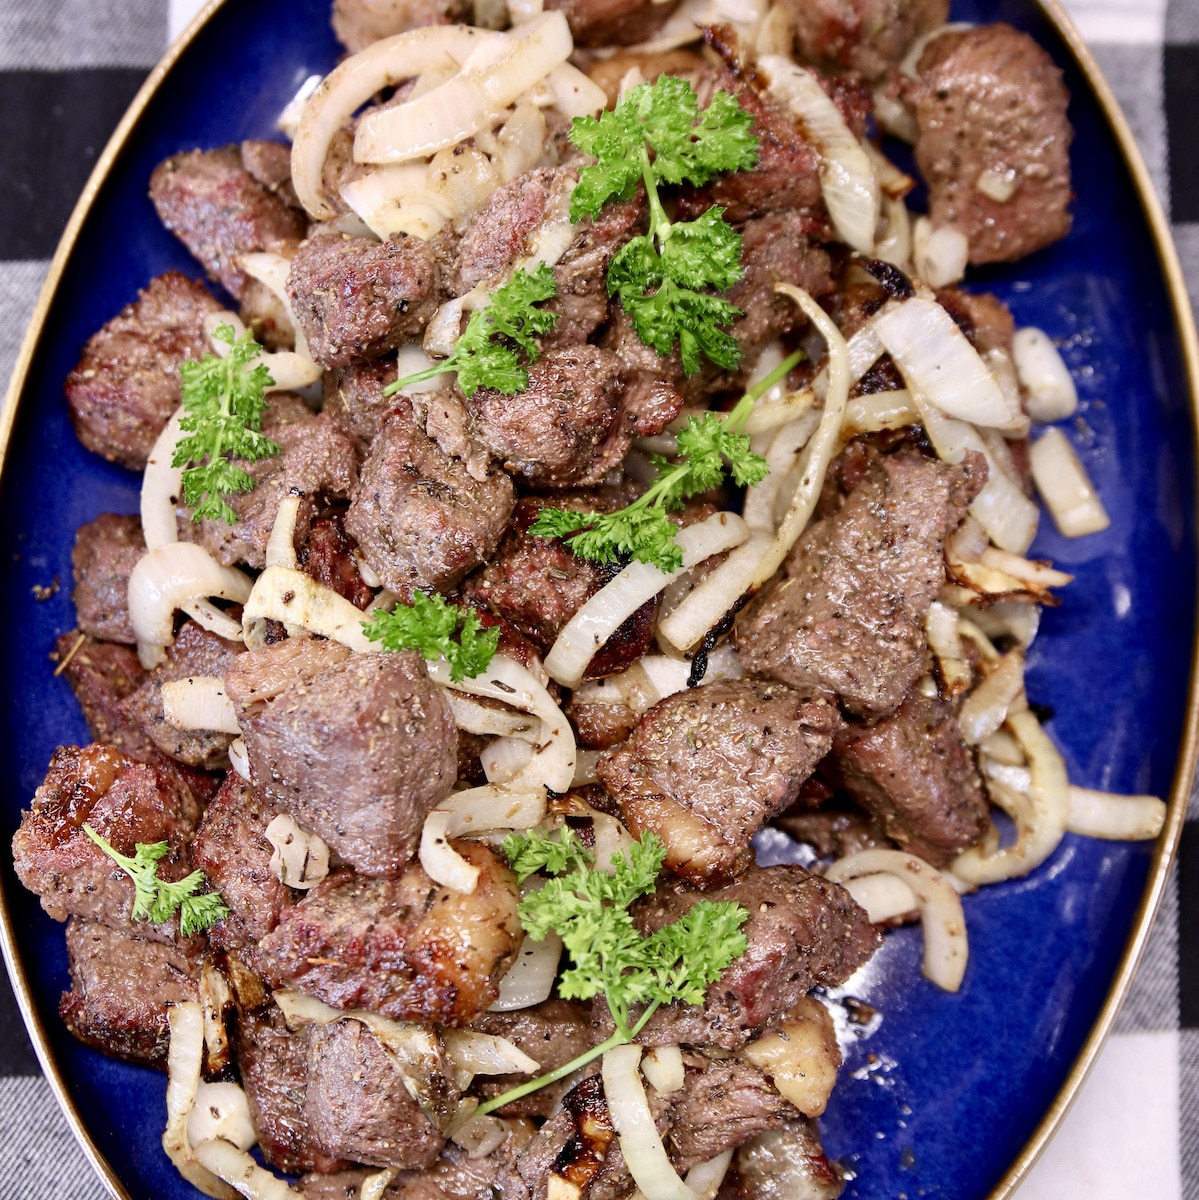 Steak bites with onions on a platter.